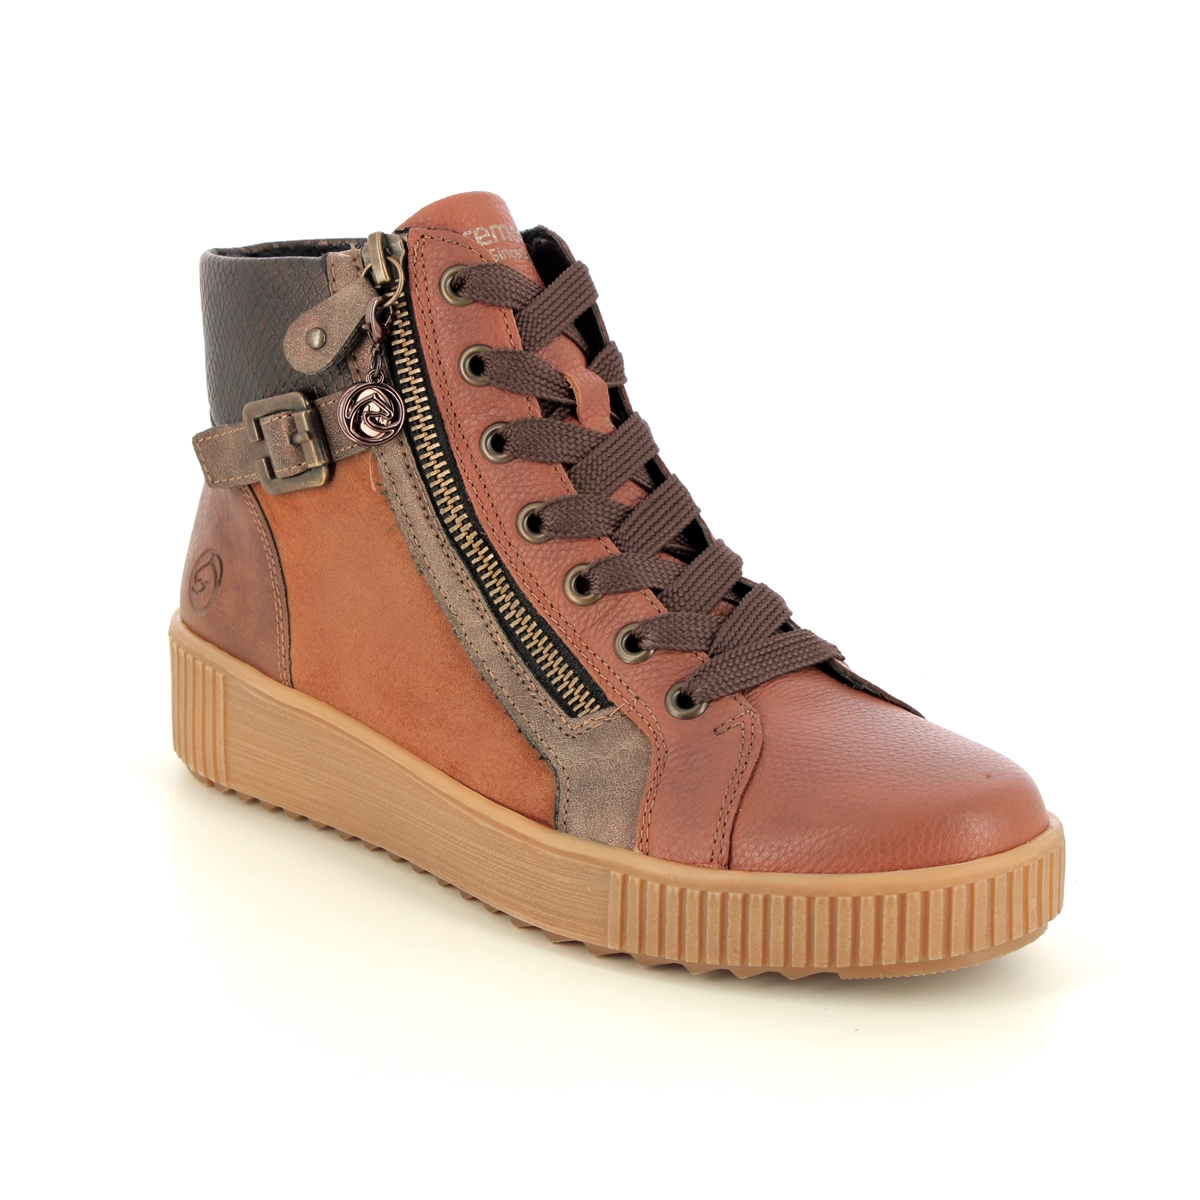 Remonte Durlozip Elle Tan Leather Womens Hi Tops R7997-24 In Size 40 In Plain Tan Leather